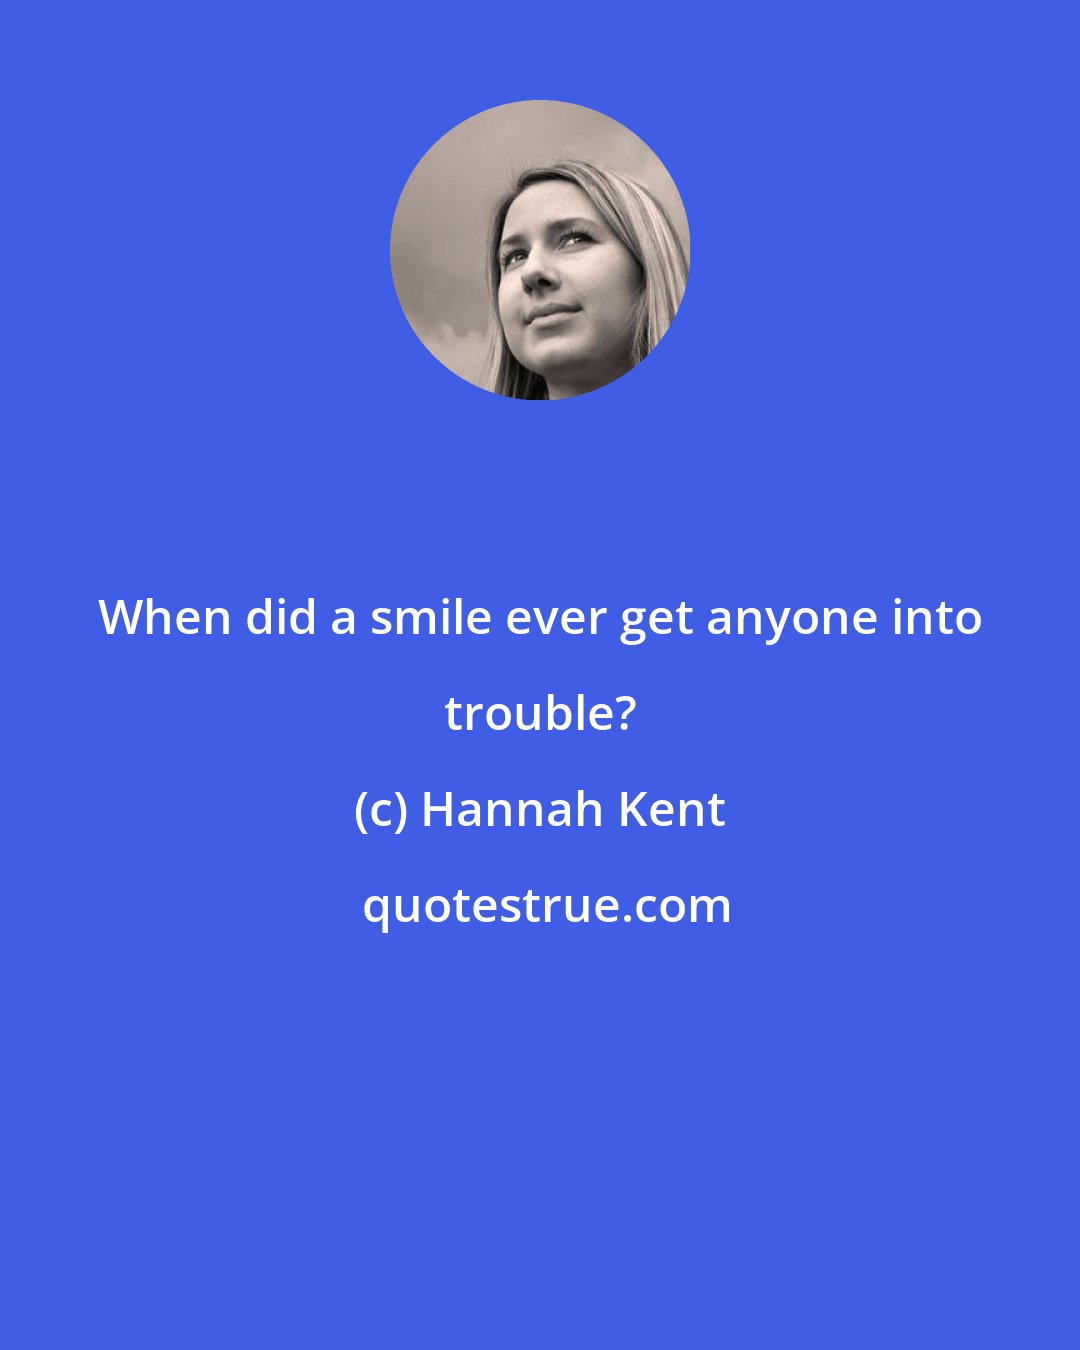 Hannah Kent: When did a smile ever get anyone into trouble?